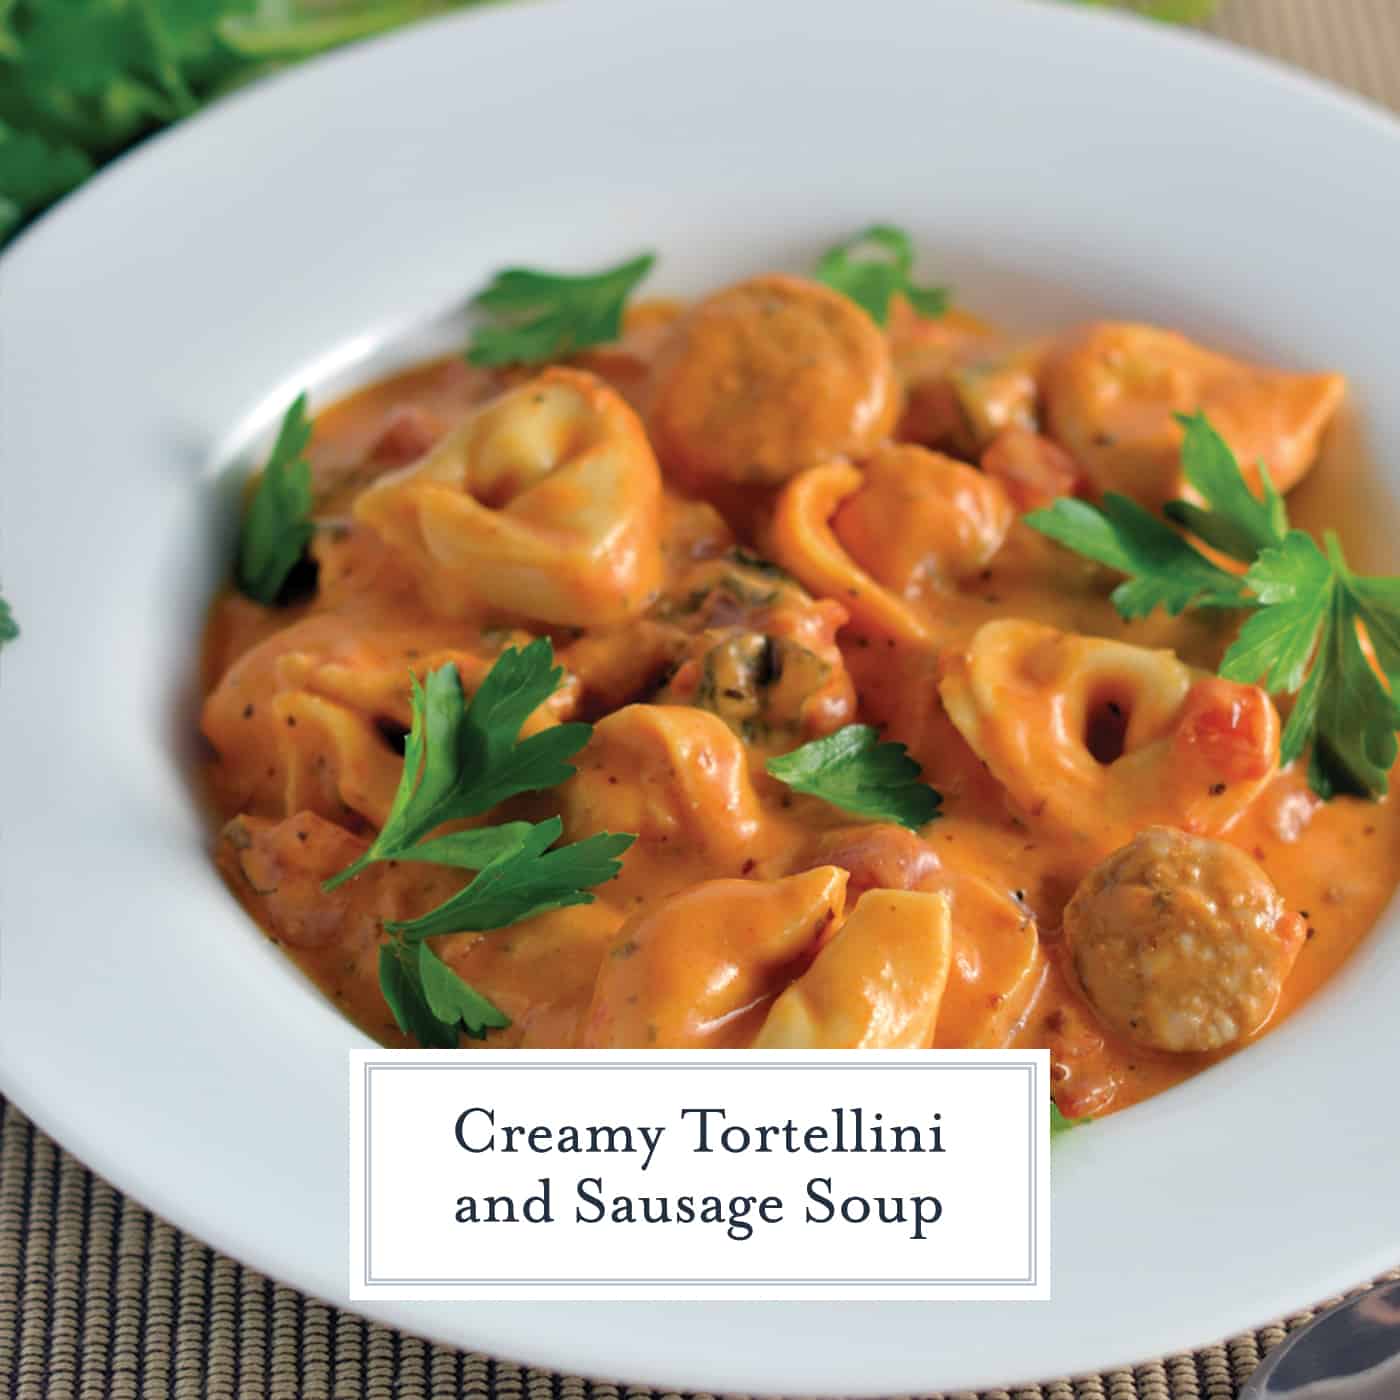 Creamy Tortellini and Sausage Soup can be made in the slow cooker, instant pot or on the stove top. Cheesy tortellini with zesty sauce in a tomato based soup! #sausagesoup #tortellinisoup #slowcookersoup www.savoryexperiments.com 